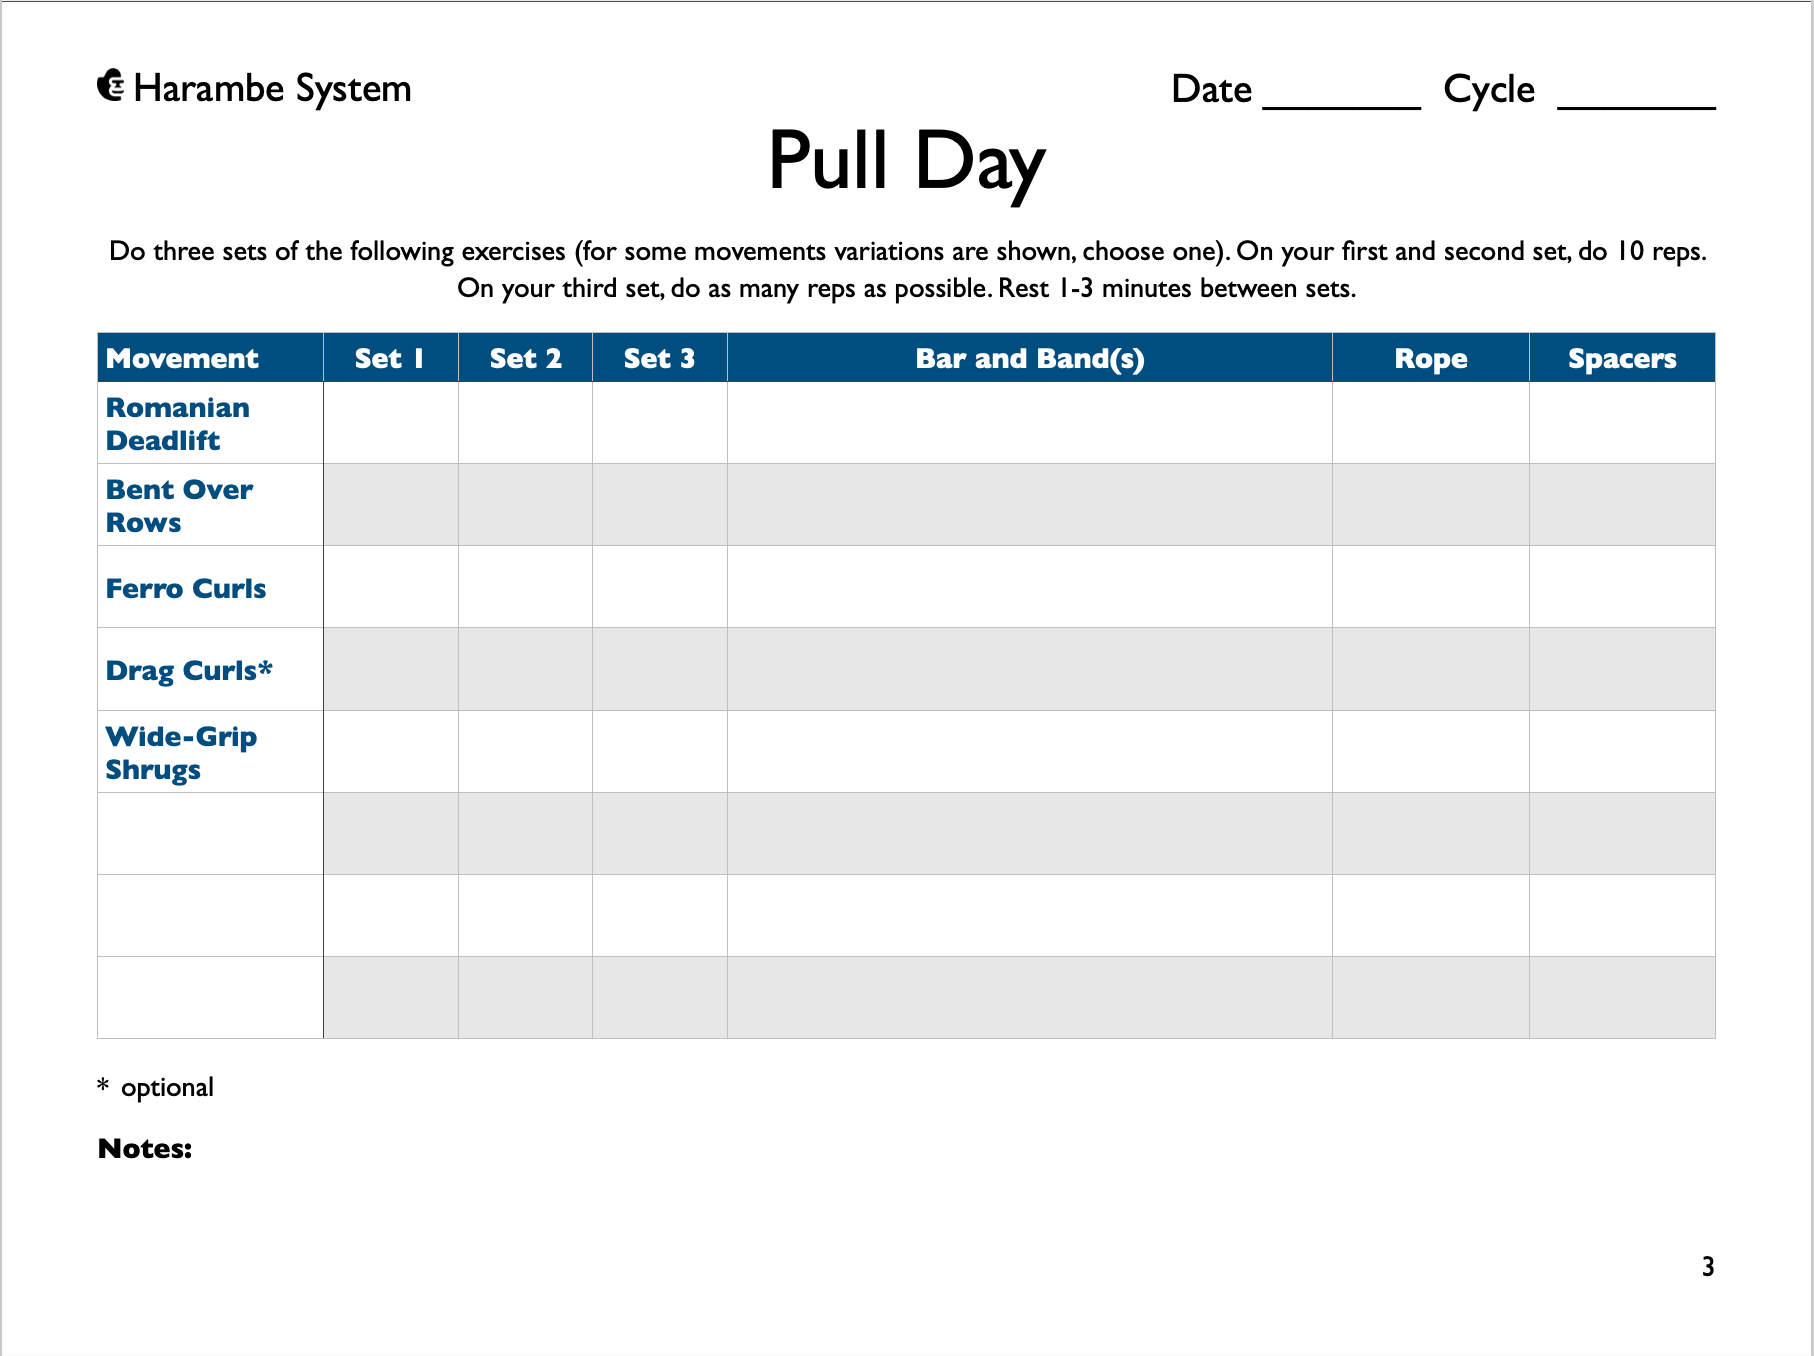 Image of one of the sample charts, pull day, from the booklet.